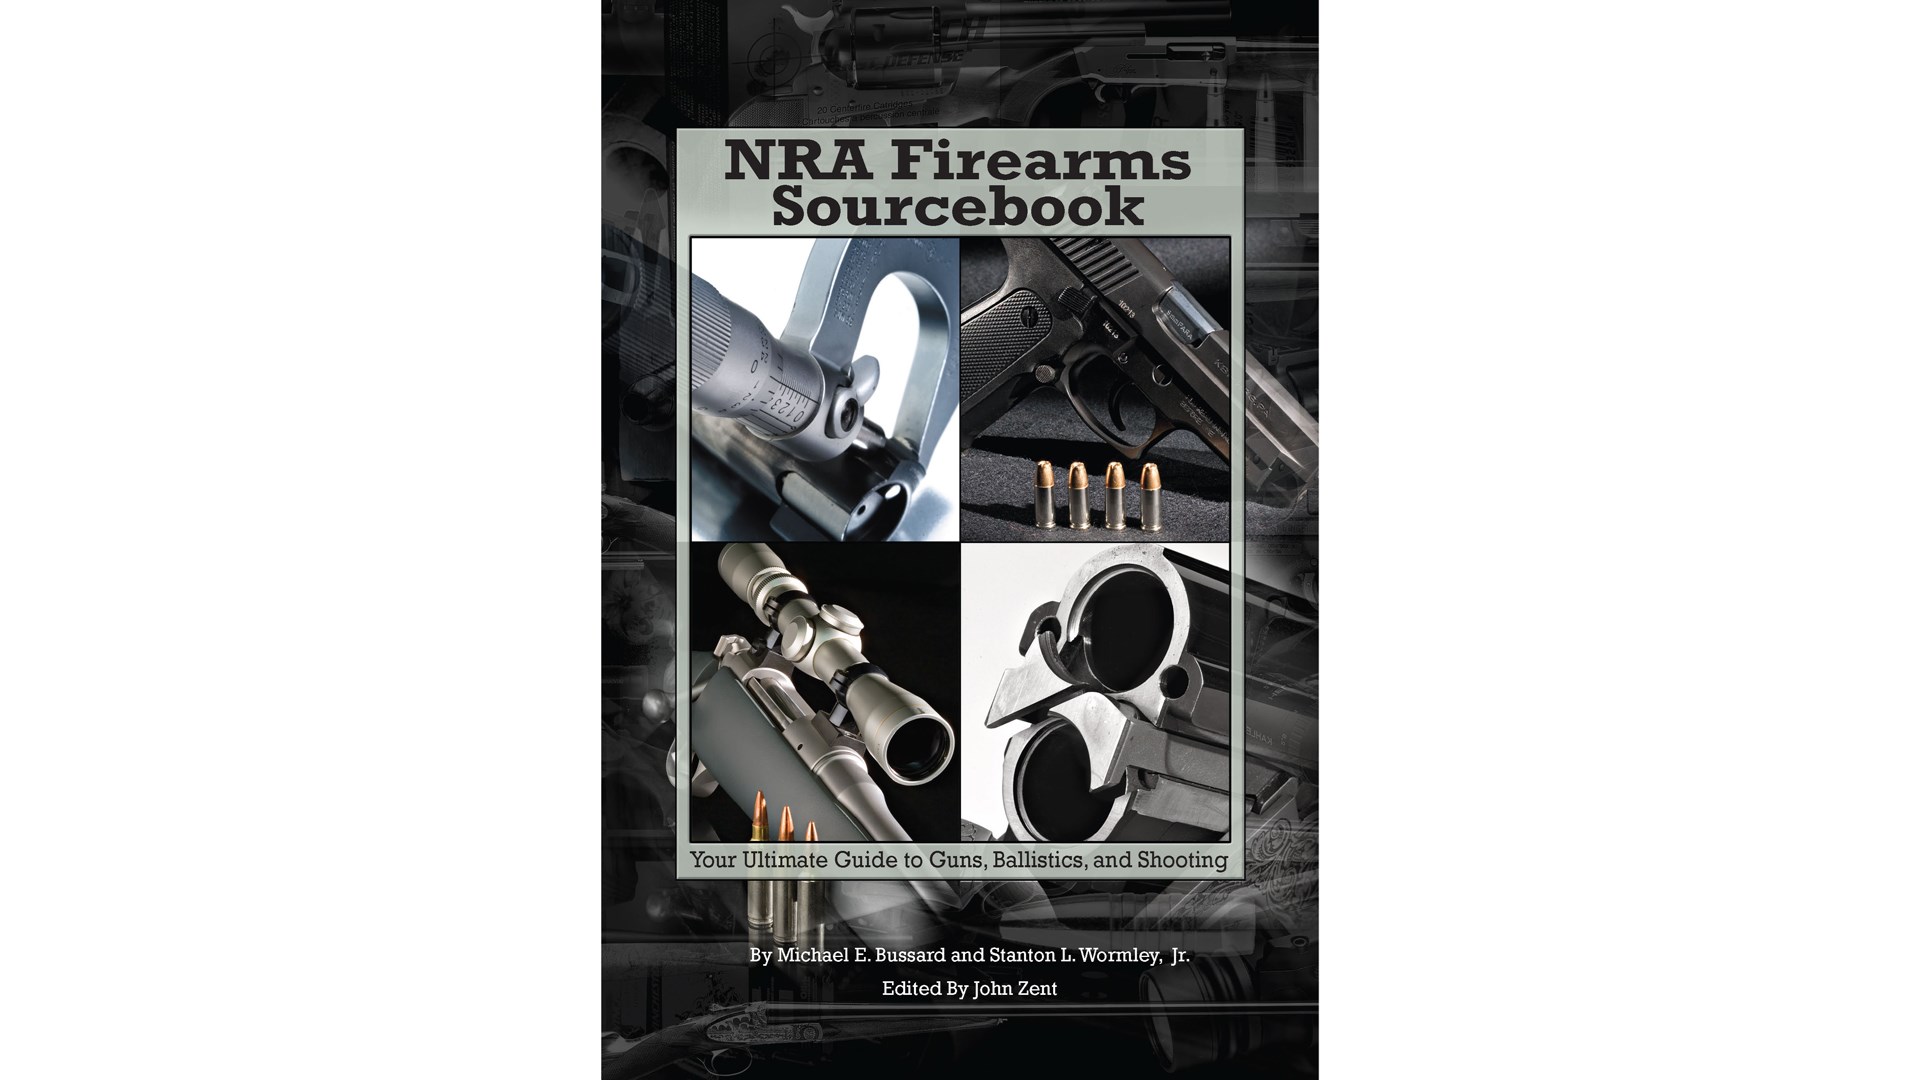 NRA Firearms Sourcebook cover image gun parts text book cover